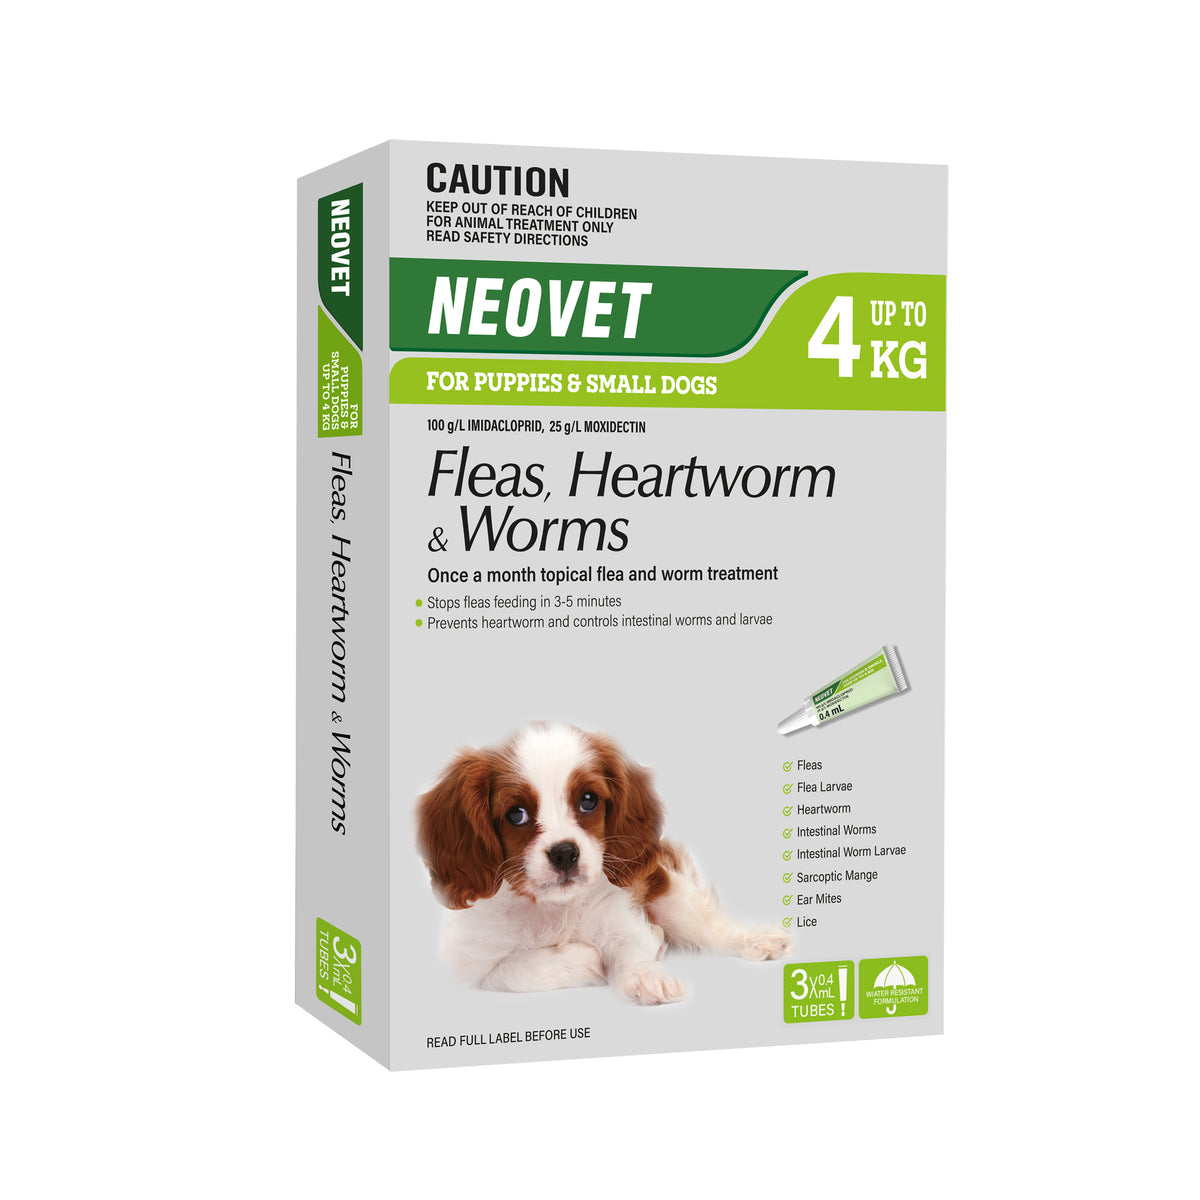 Neovet for Puppies &amp; Small Dogs (Fleas, Heartworm &amp; Worms) up to 4kg